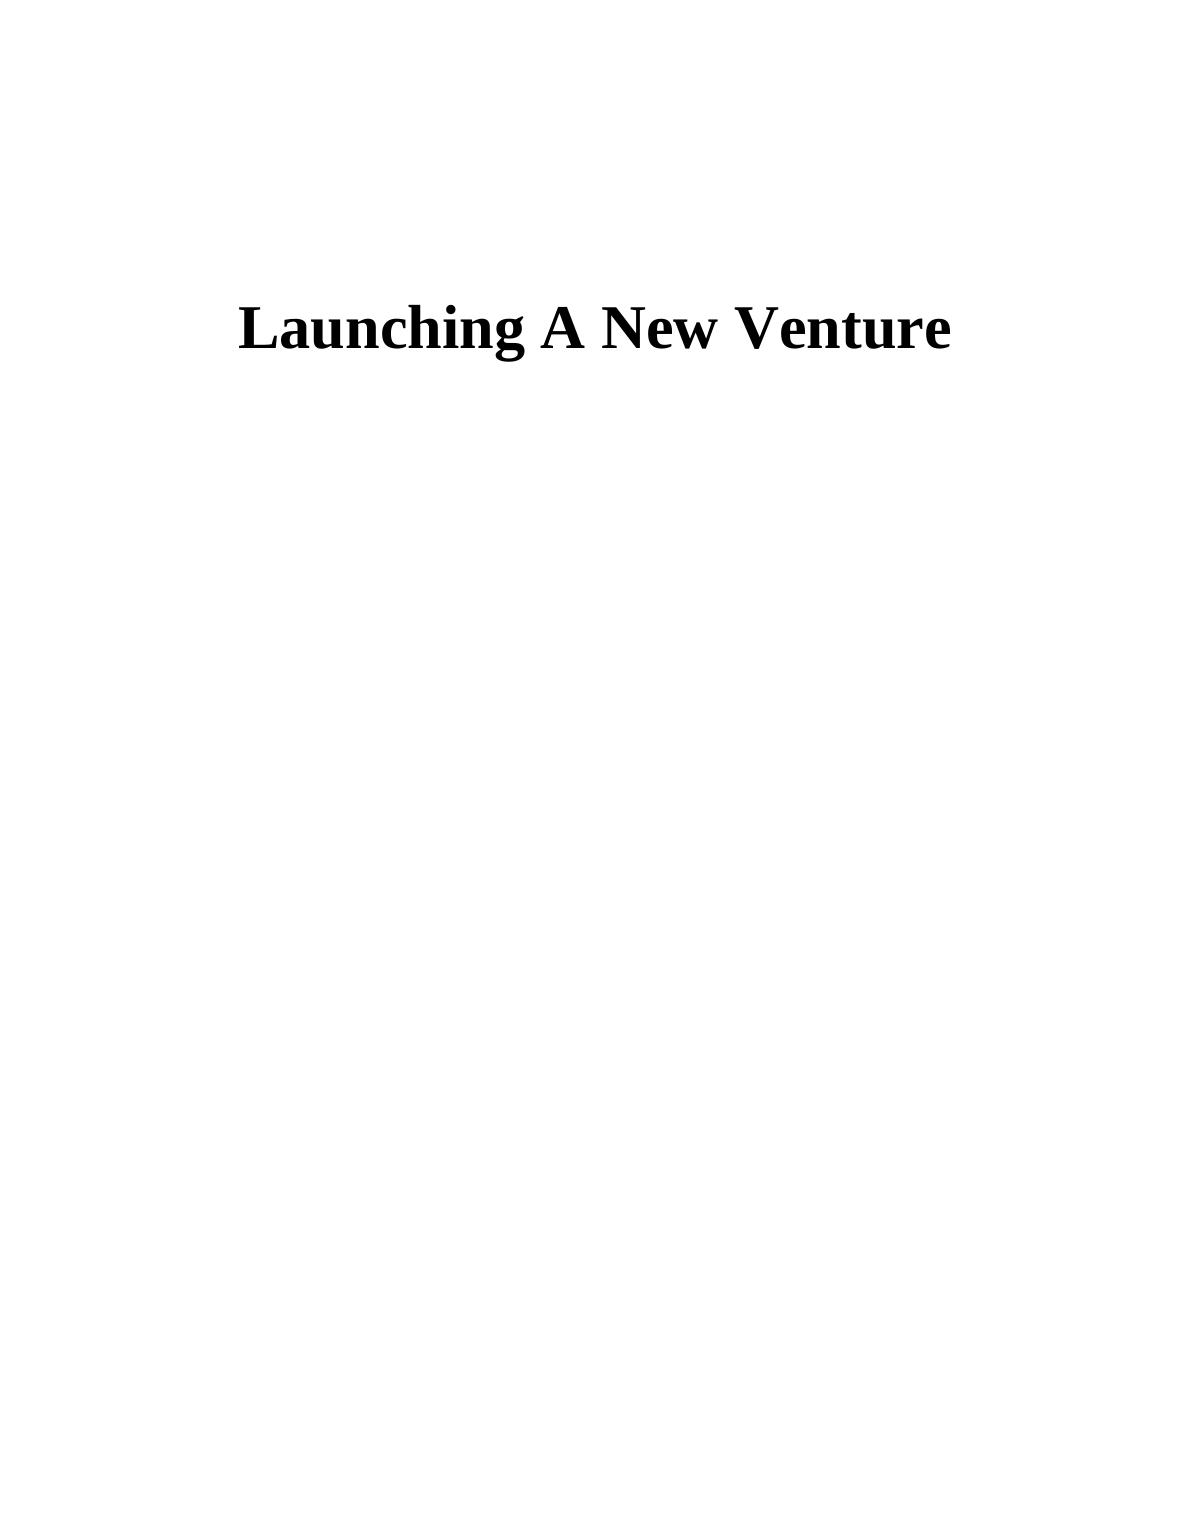 Launching a New Venture Assignment_1